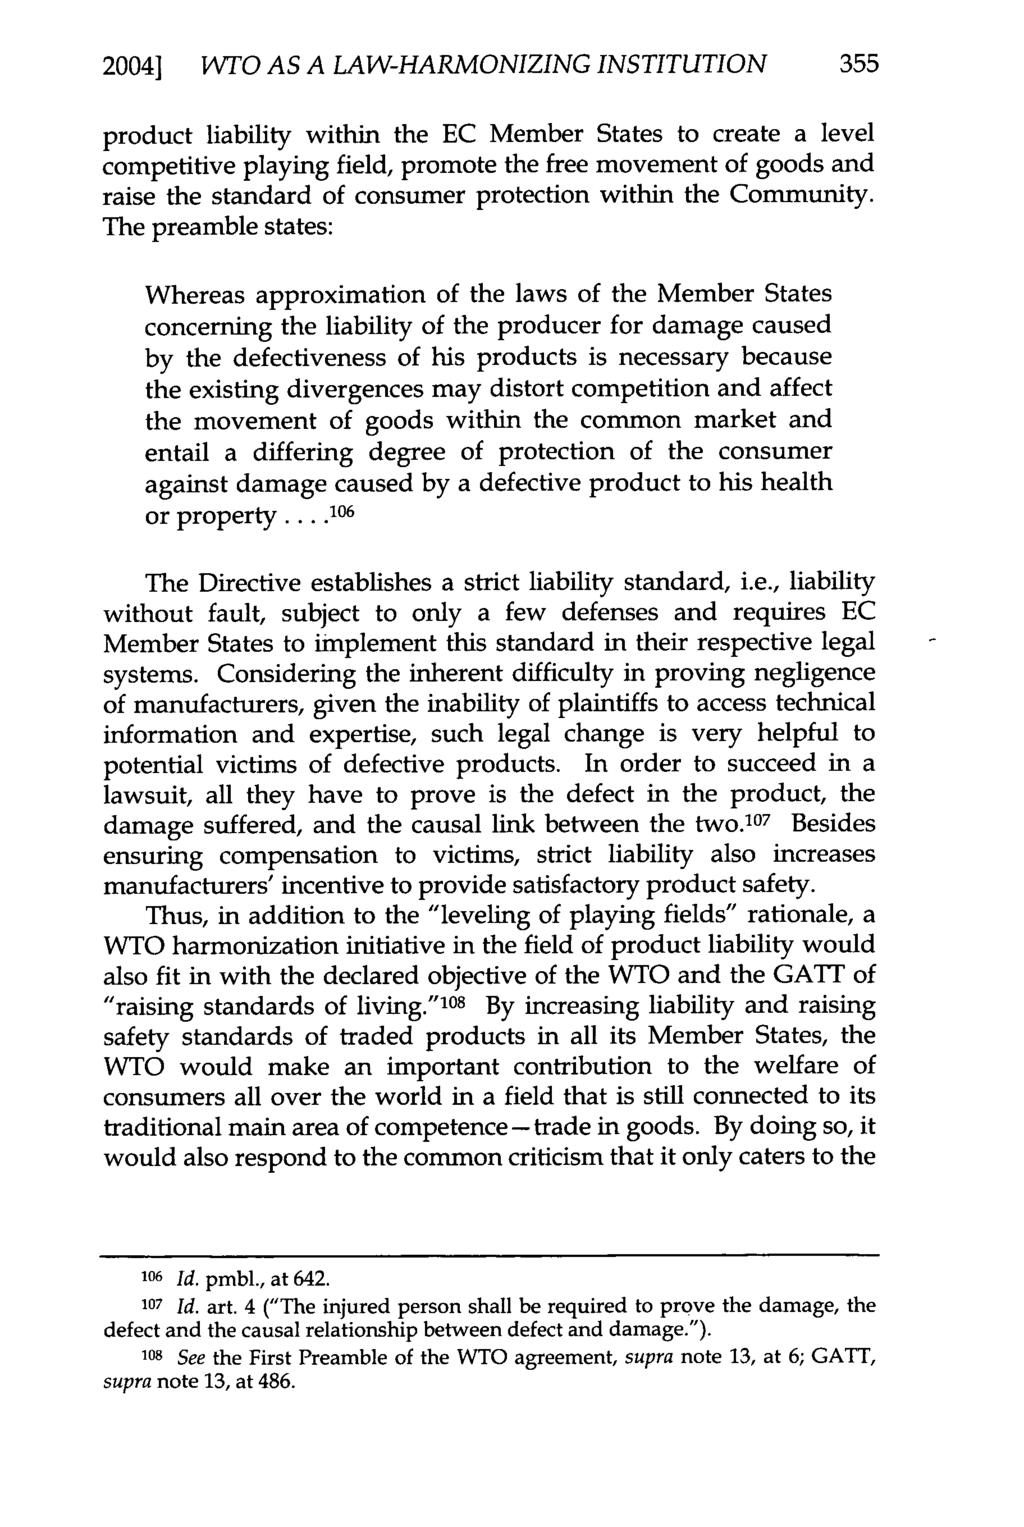 2004] WTO AS A LAW-HARMONIZING INSTITUTION 355 product liability within the EC Member States to create a level competitive playing field, promote the free movement of goods and raise the standard of